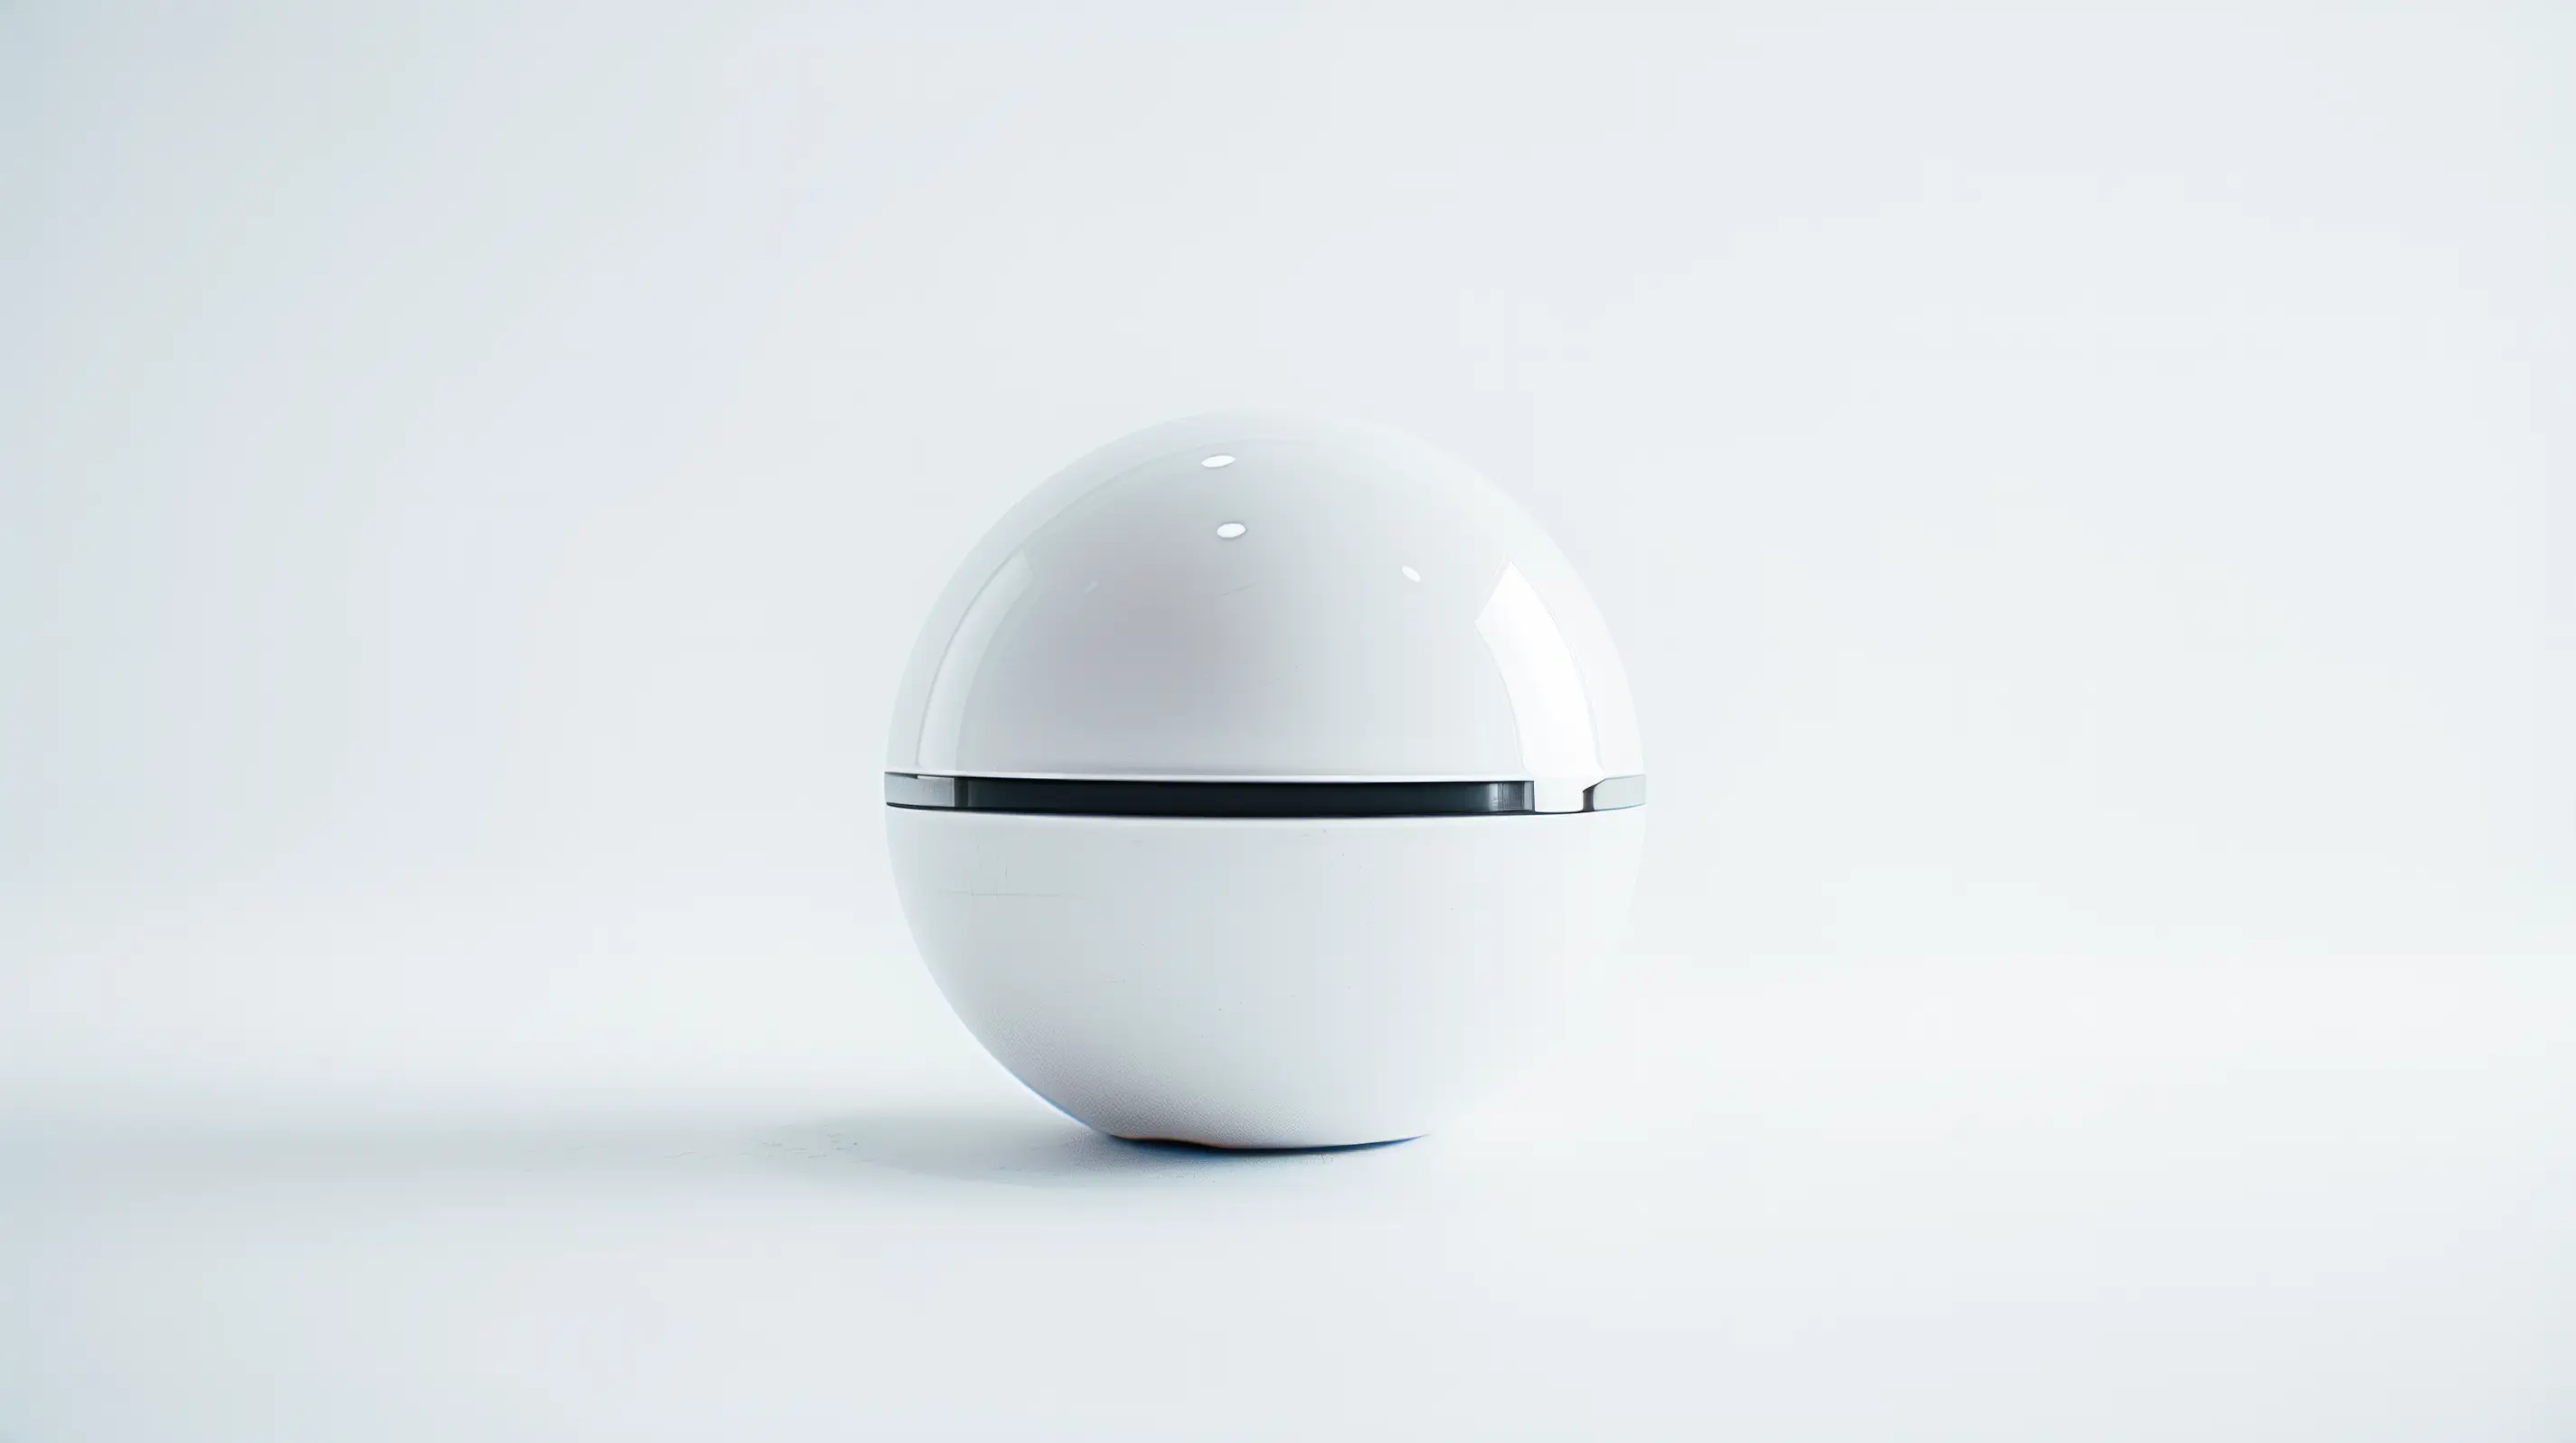 A white, spherical modern device